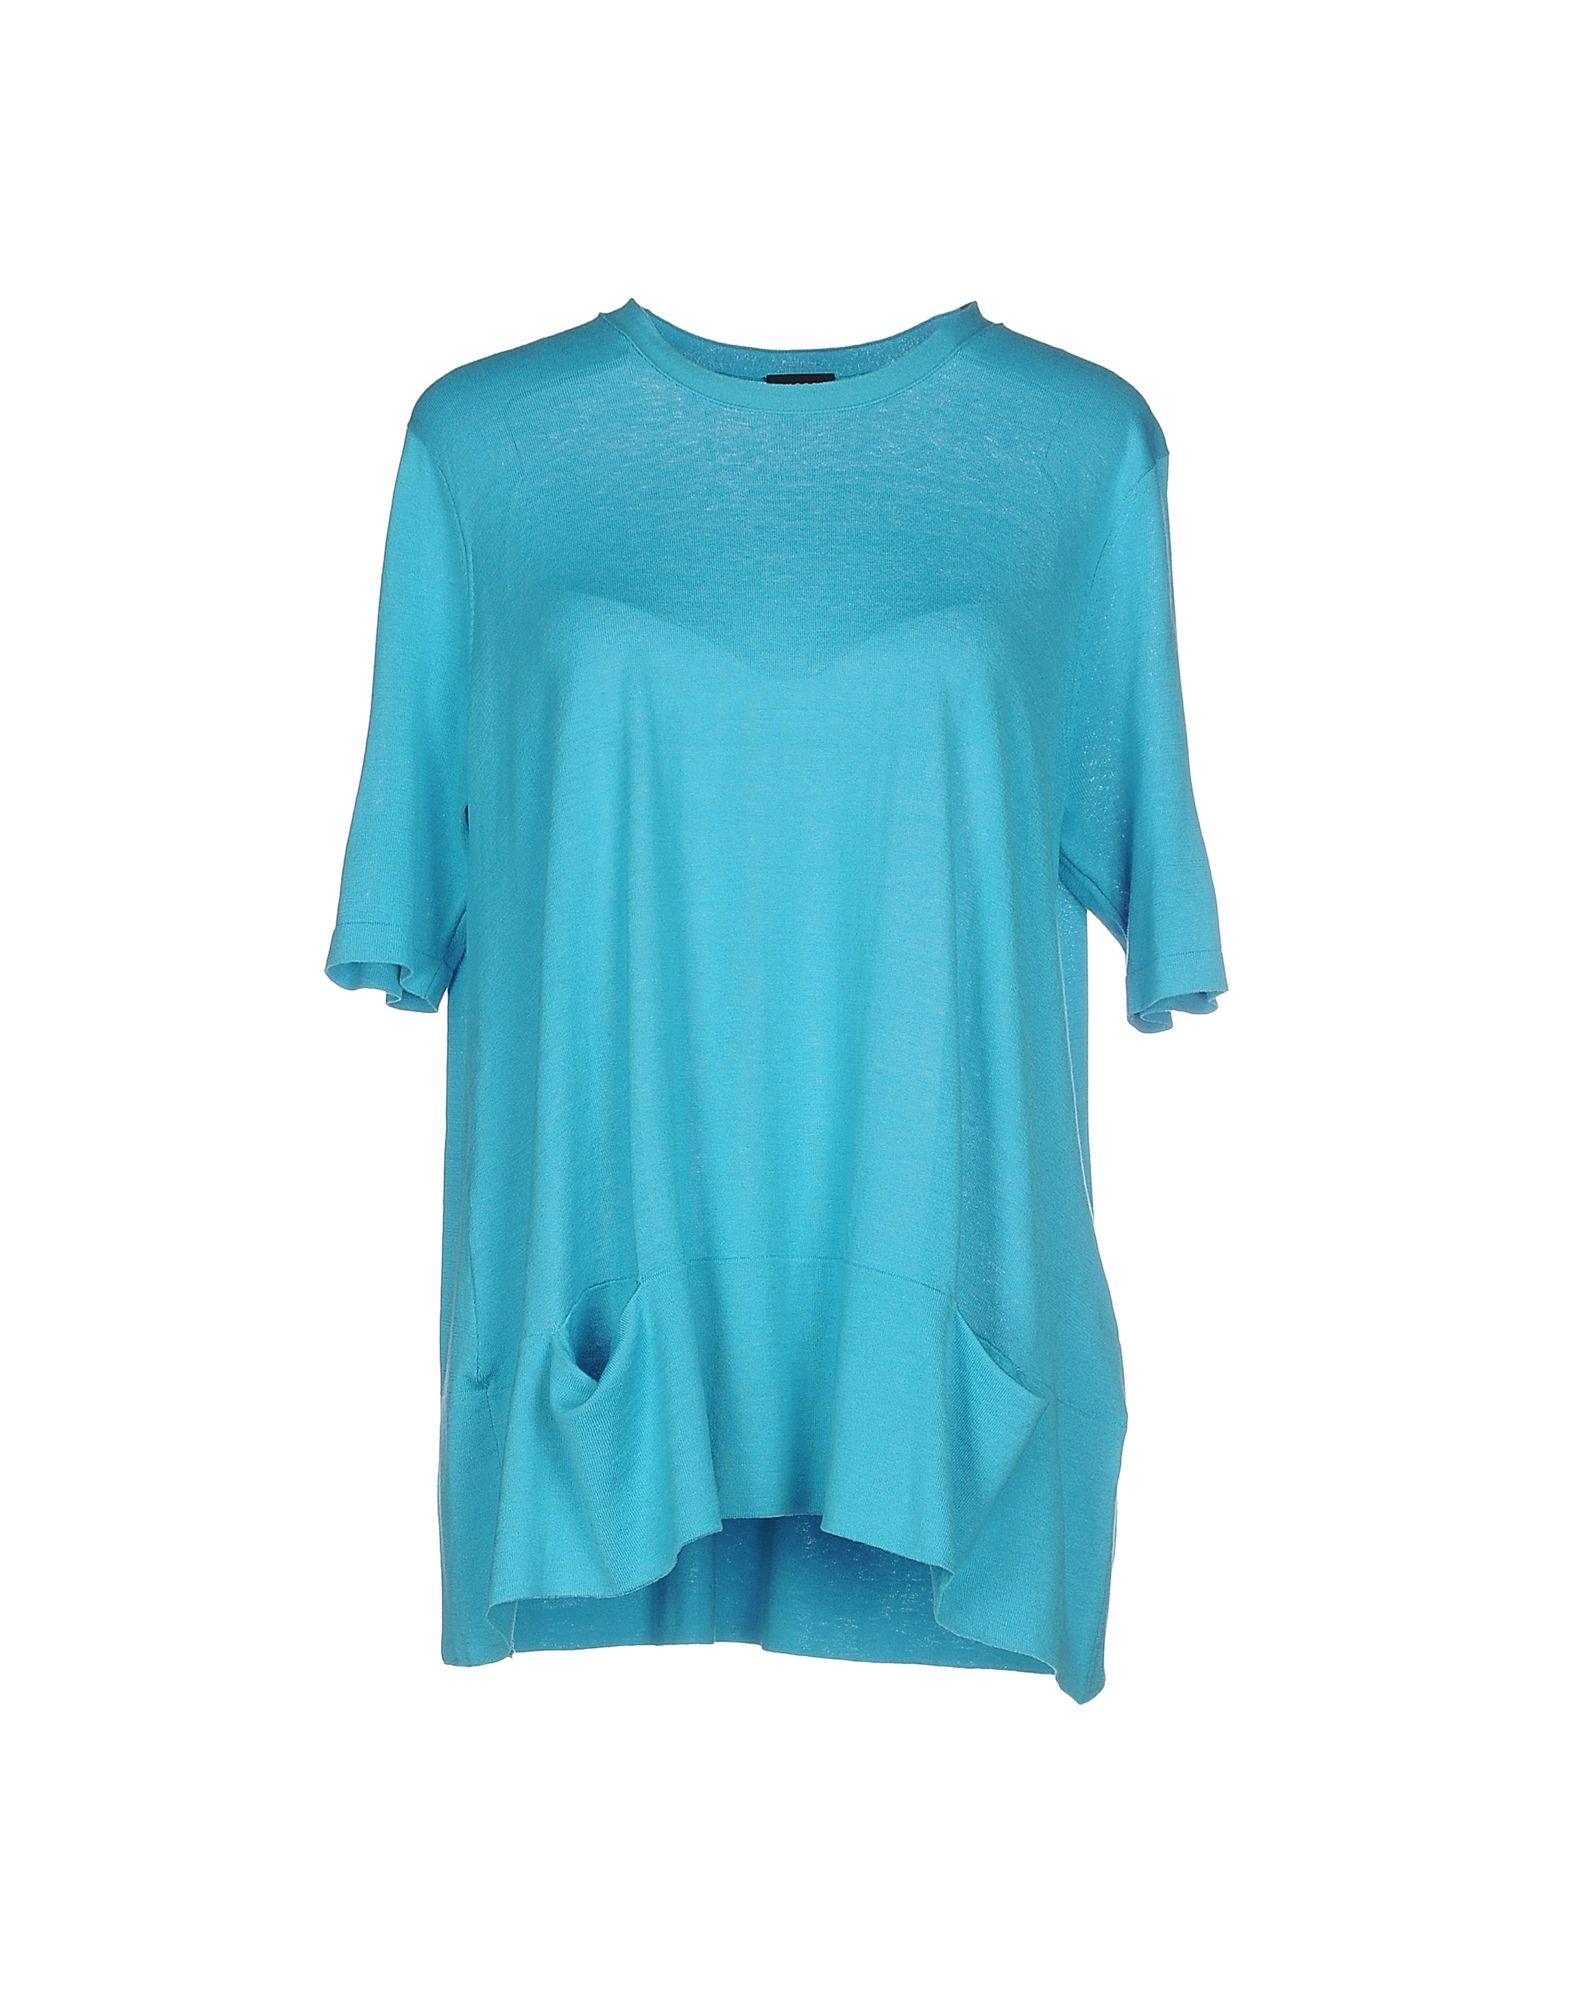 Snobby sheep Jumper in Blue (Turquoise) - Save 61% | Lyst